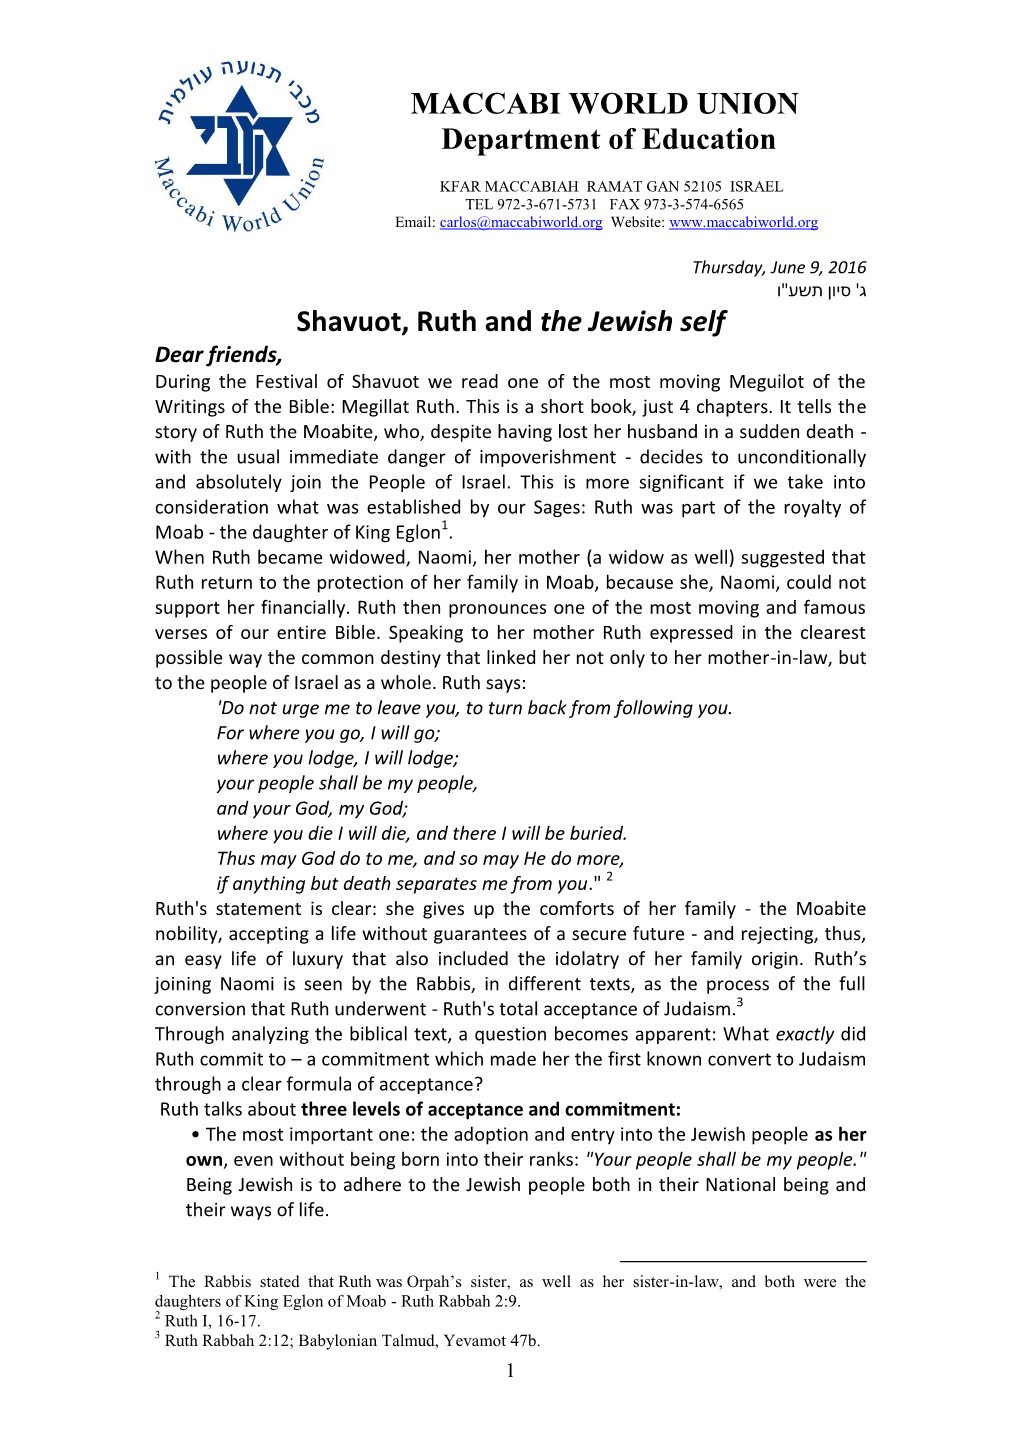 Shavuot, Ruth and the Jewish Self Dear Friends, During the Festival of Shavuot We Read One of the Most Moving Meguilot of the Writings of the Bible: Megillat Ruth